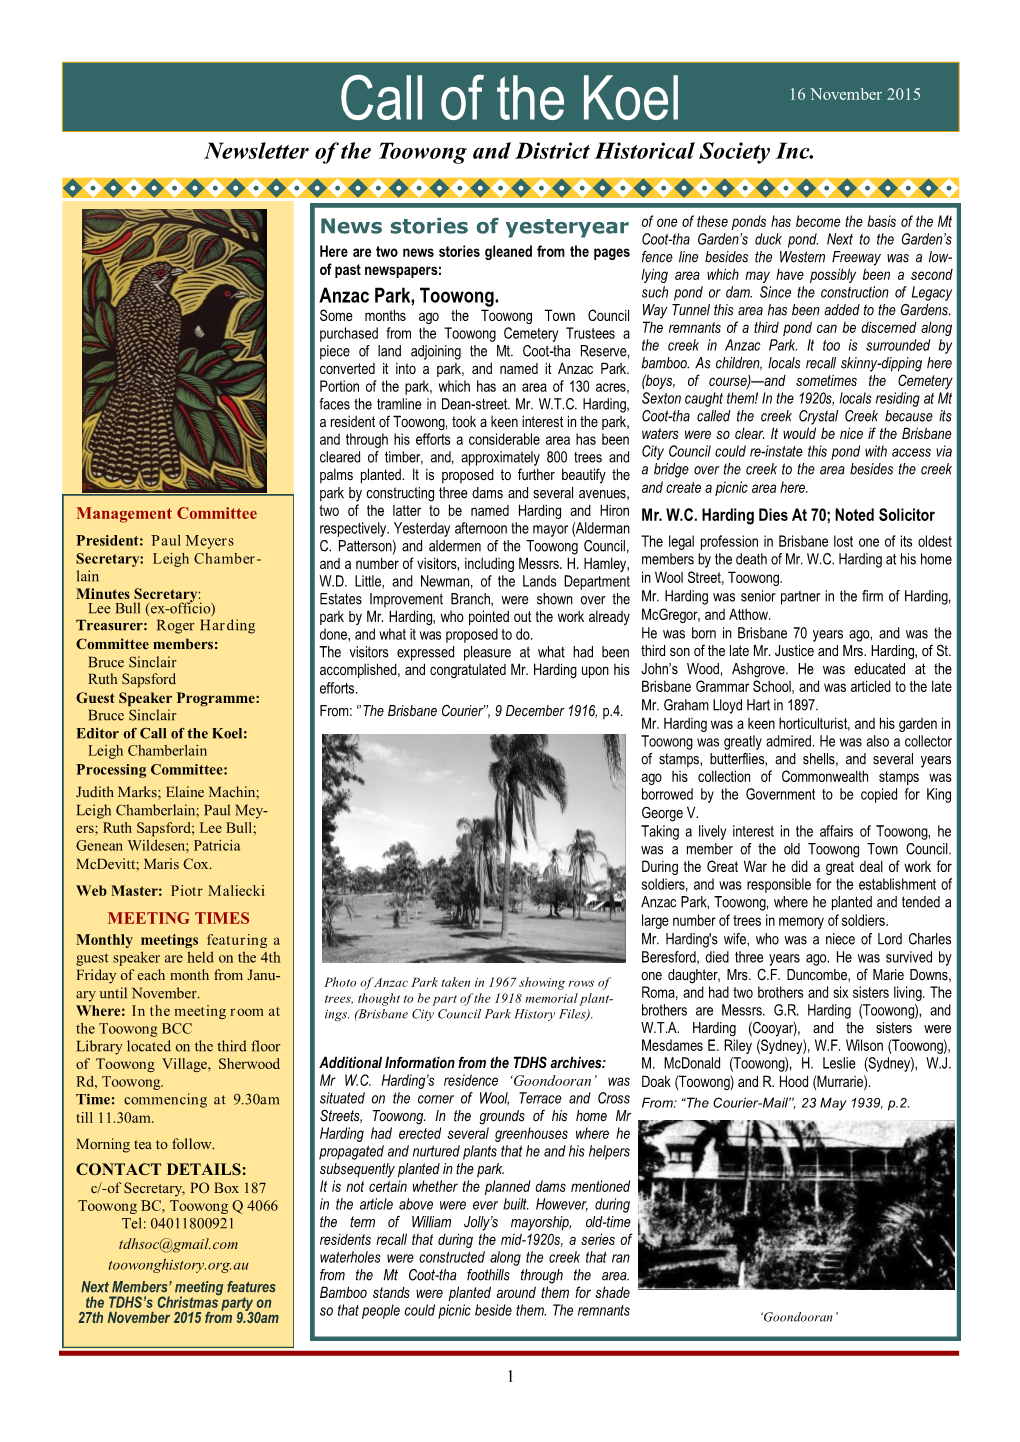 Call of the Koel February16 November 2013 2015 Newsletter of the Toowong and District Historical Society Inc